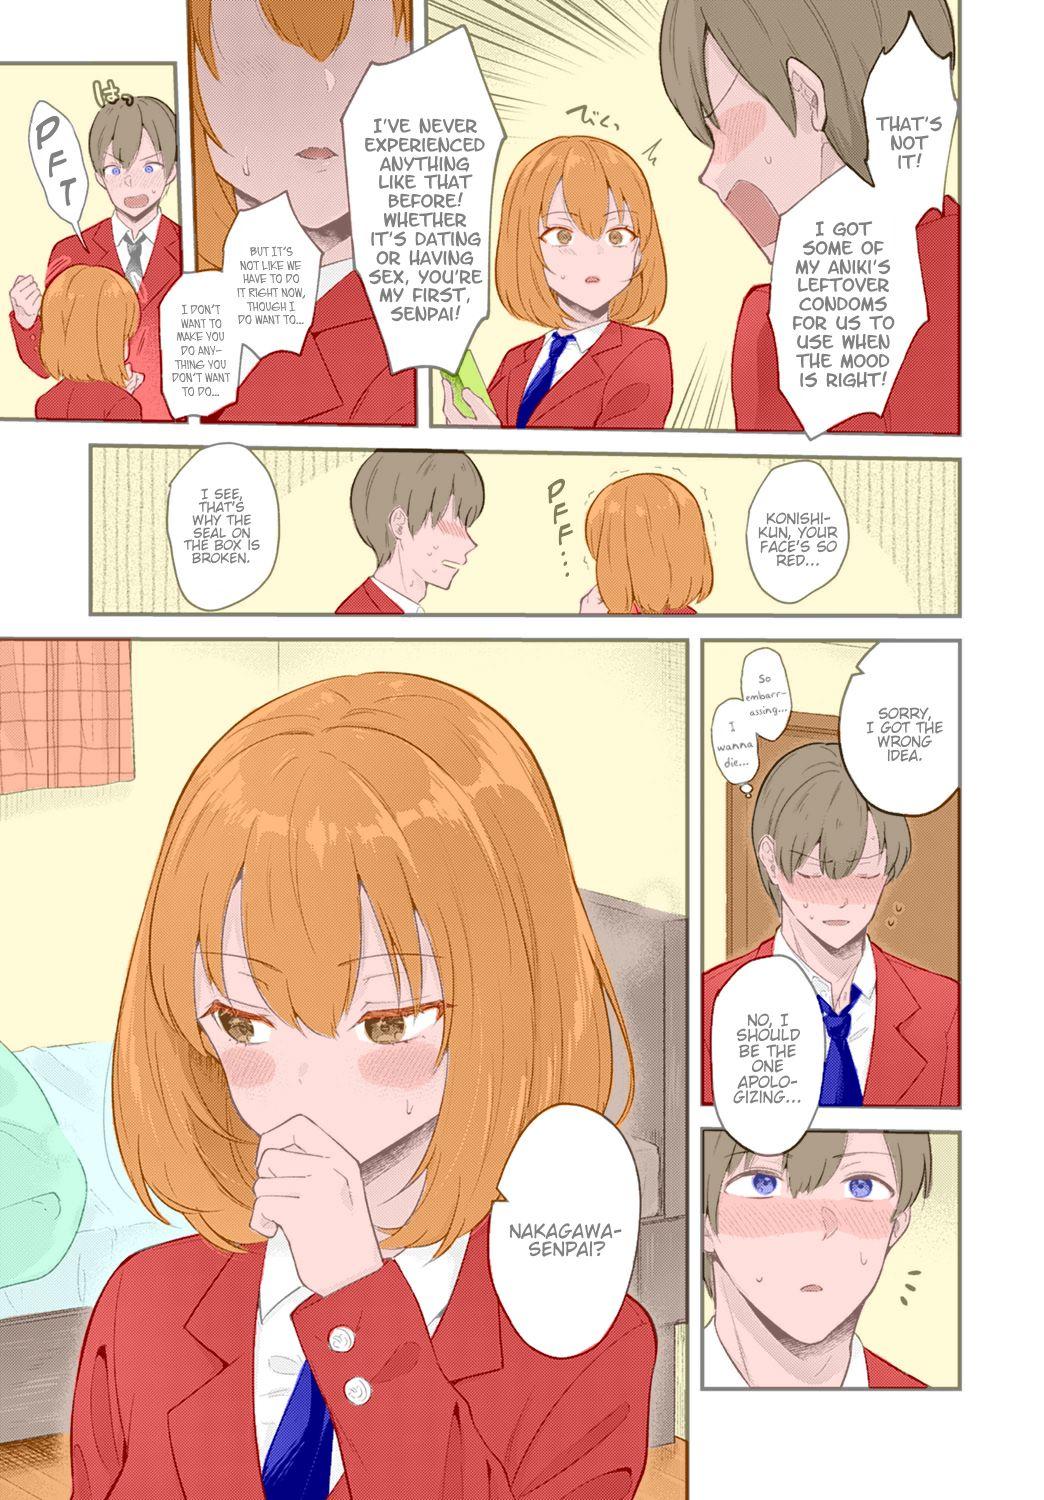 Plug Kanojo Face | Girlfriend Face Funny - Page 5